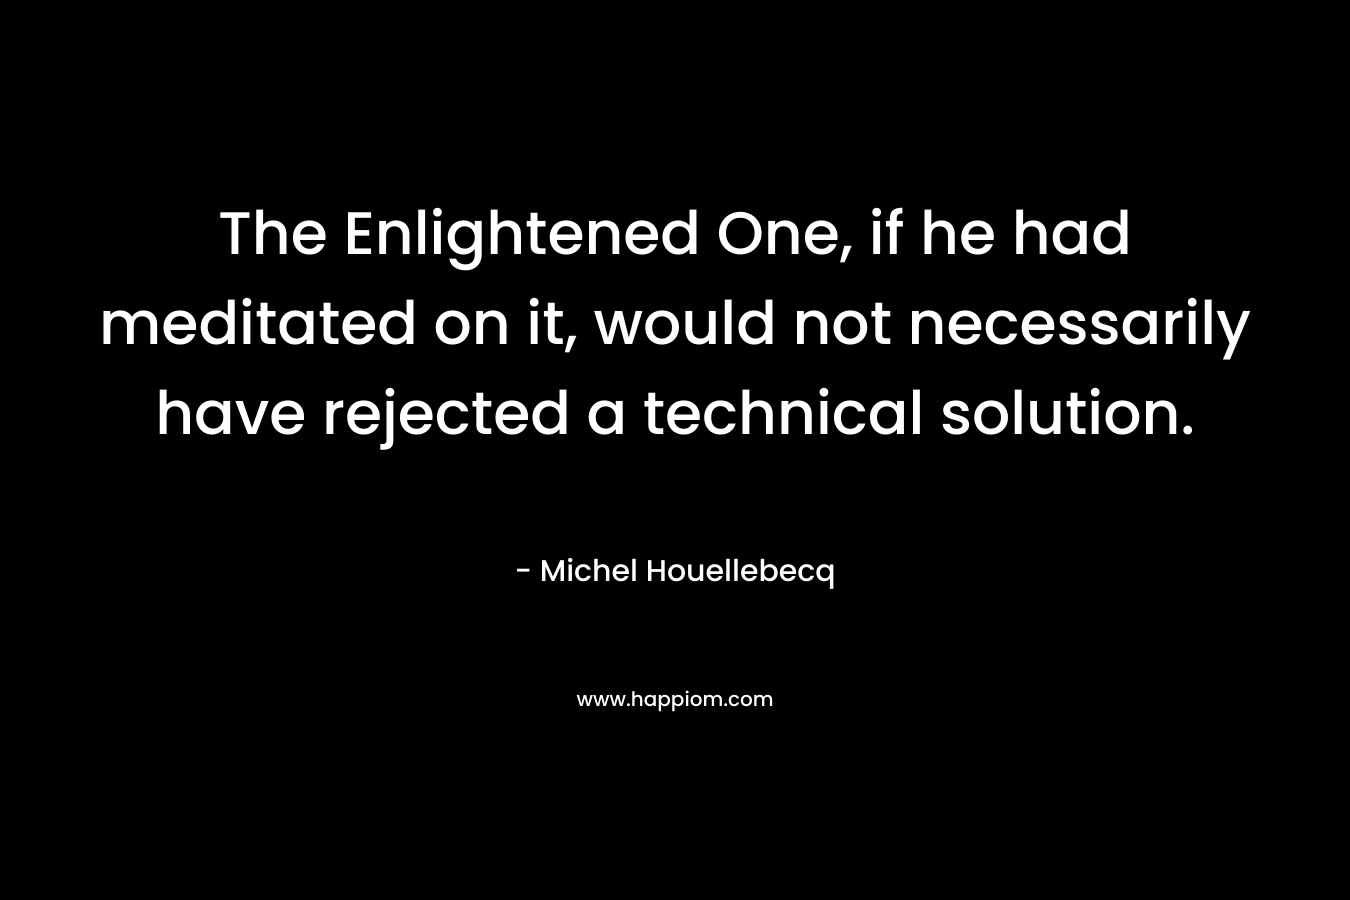 The Enlightened One, if he had meditated on it, would not necessarily have rejected a technical solution. – Michel Houellebecq